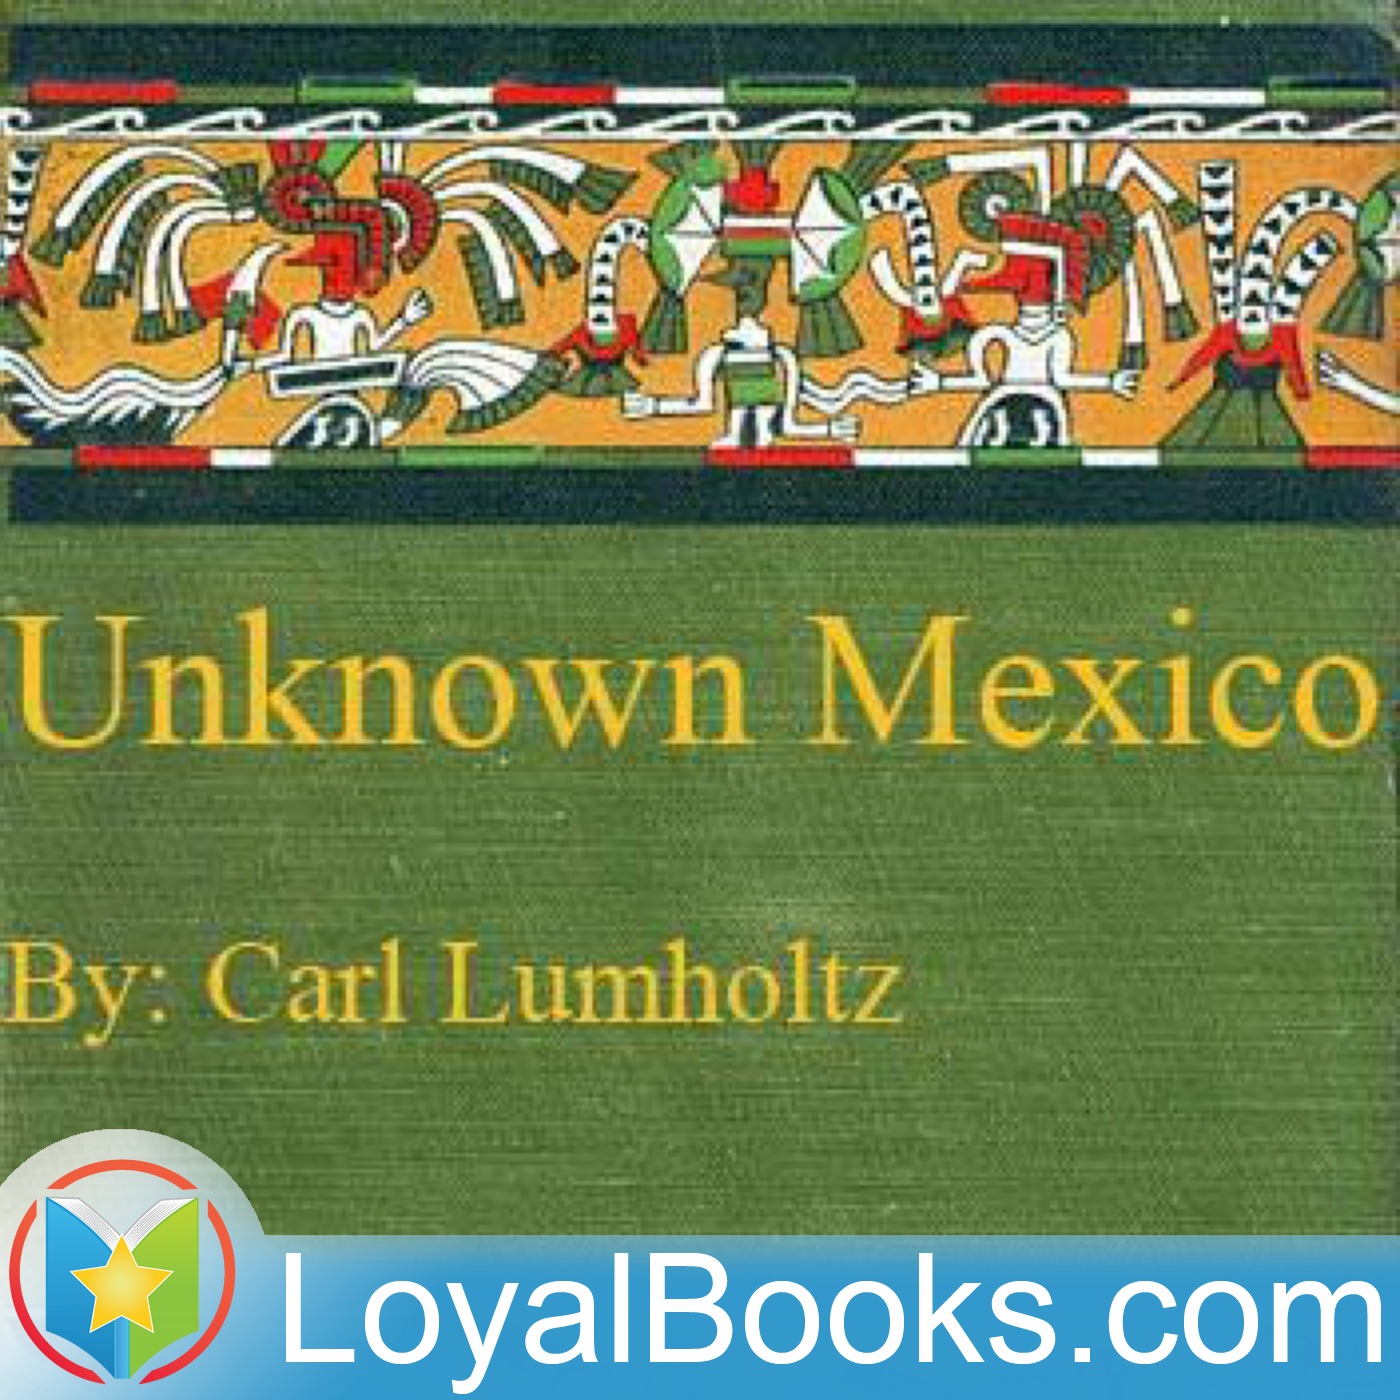 Unknown Mexico by Carl Lumholtz